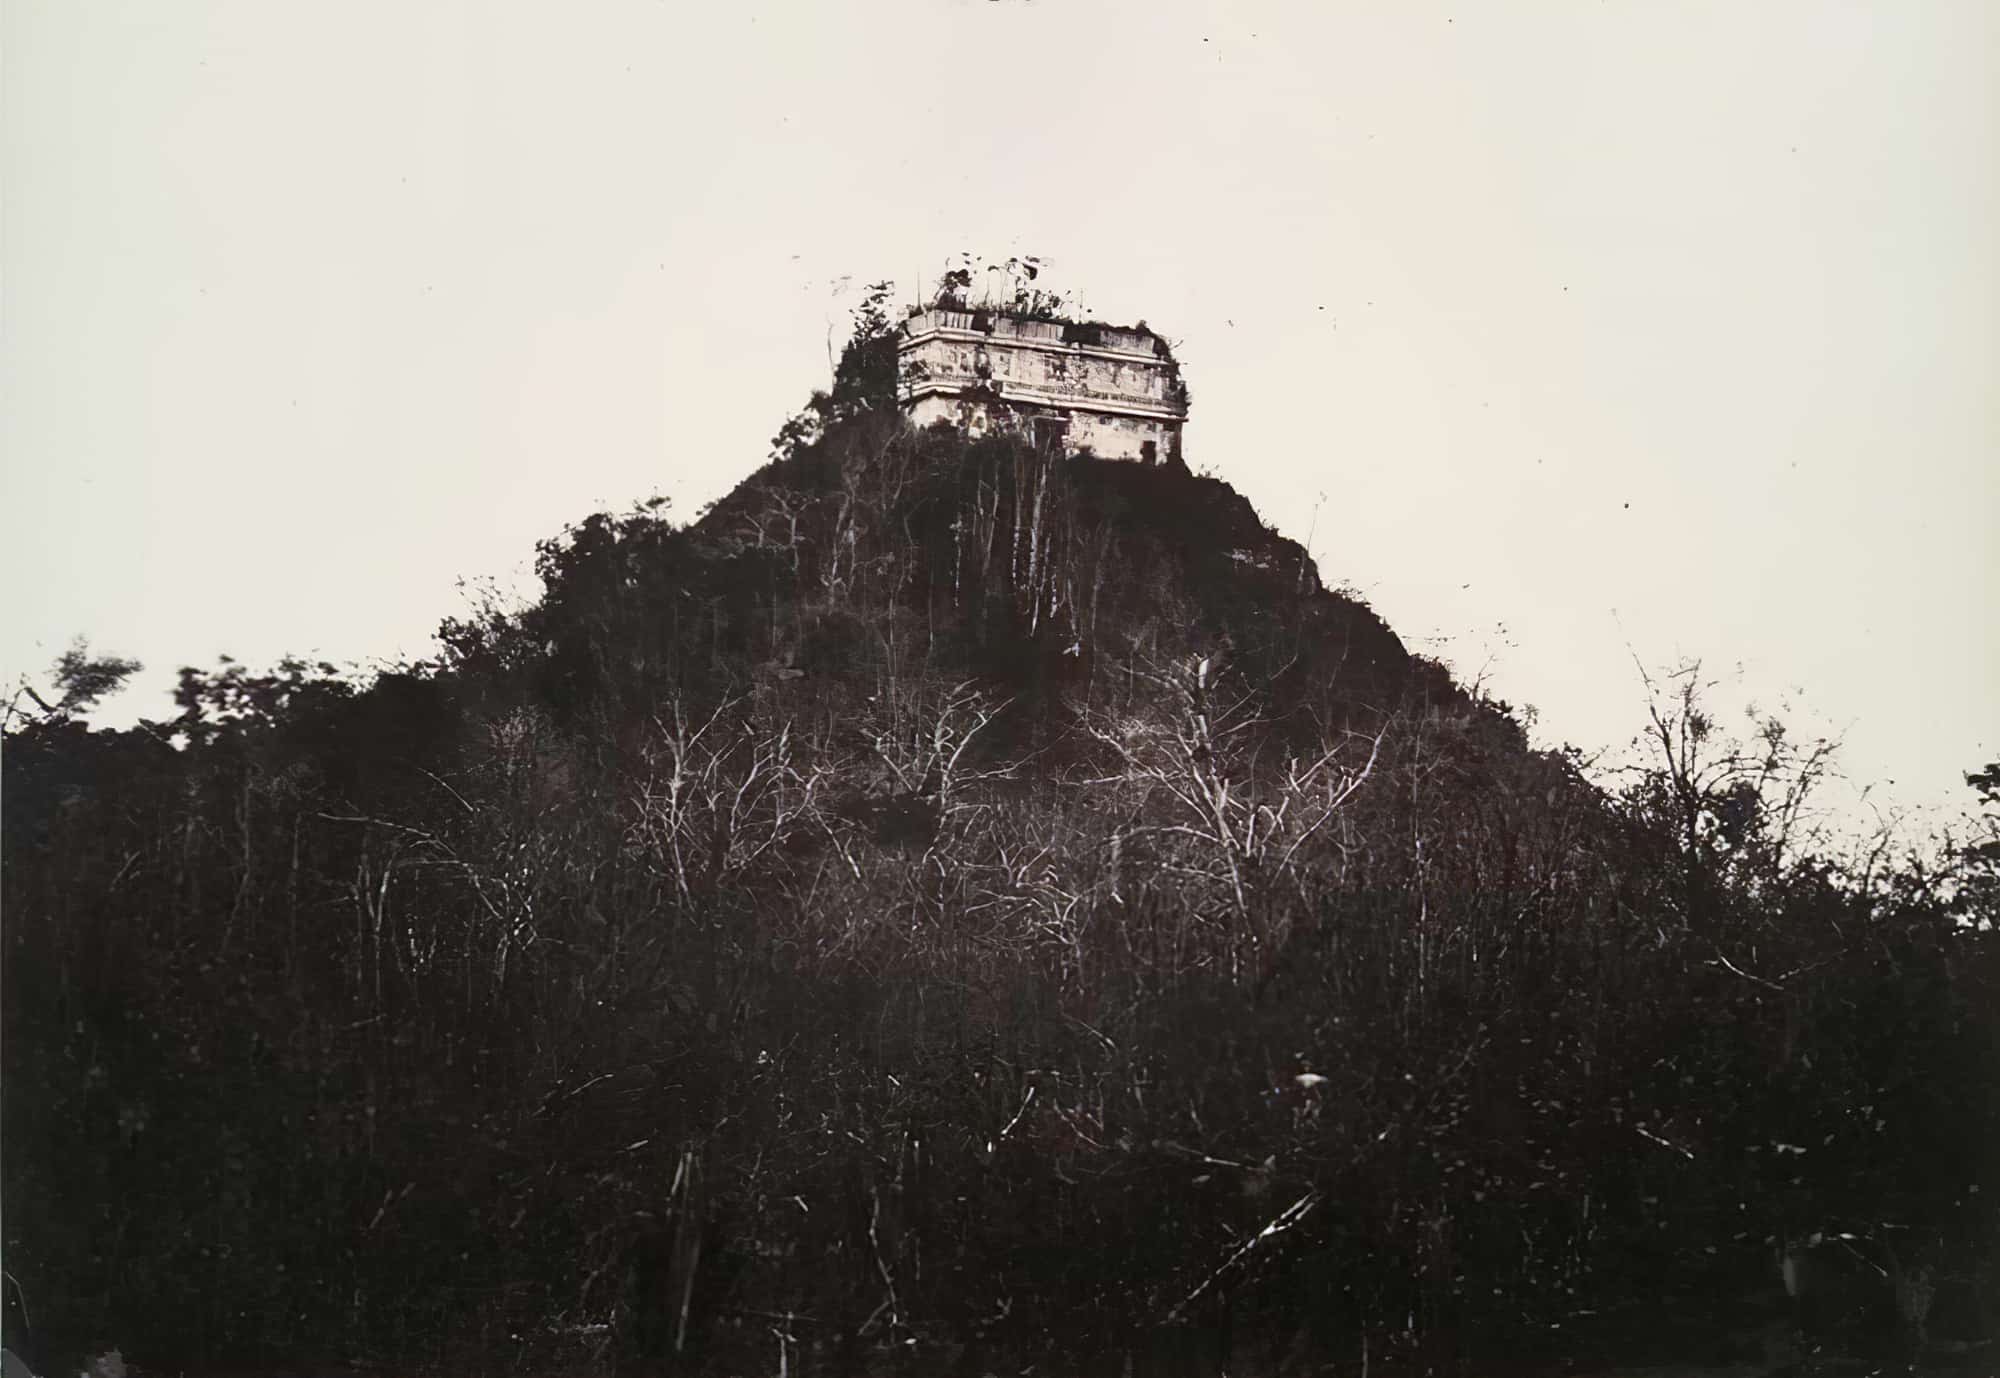 Kukulkán Pyramid, Chich'en Itza, Mexico, prior to the unearthing of its base. Source: stringfixer.com.